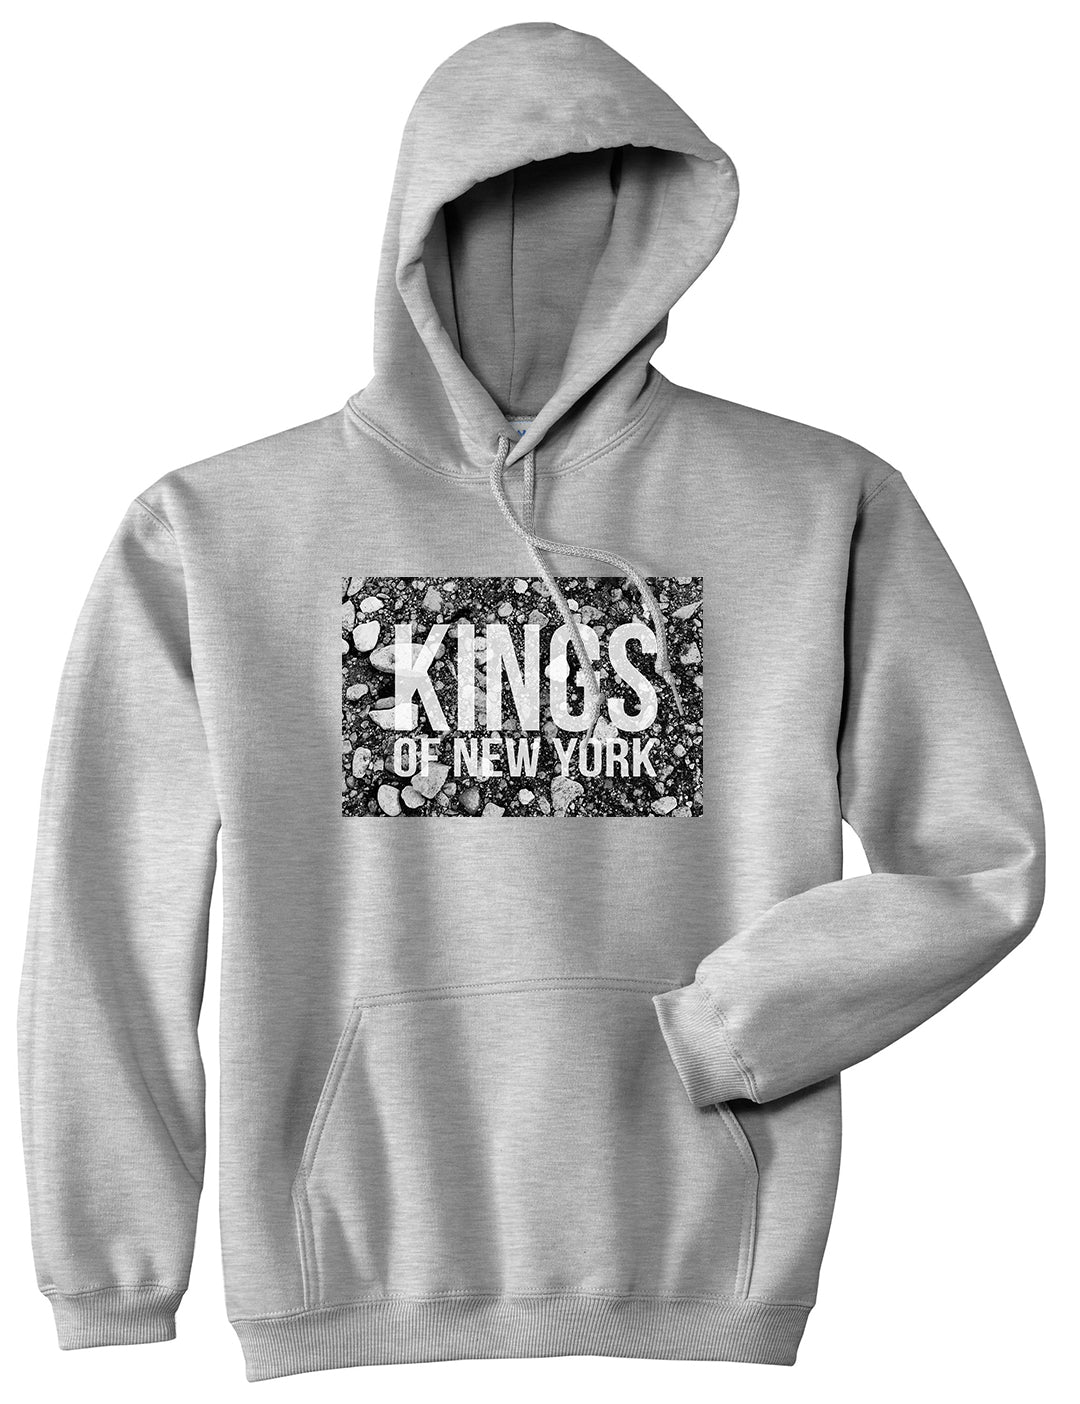 Came From The Dirt KONY Mens Pullover Hoodie Grey